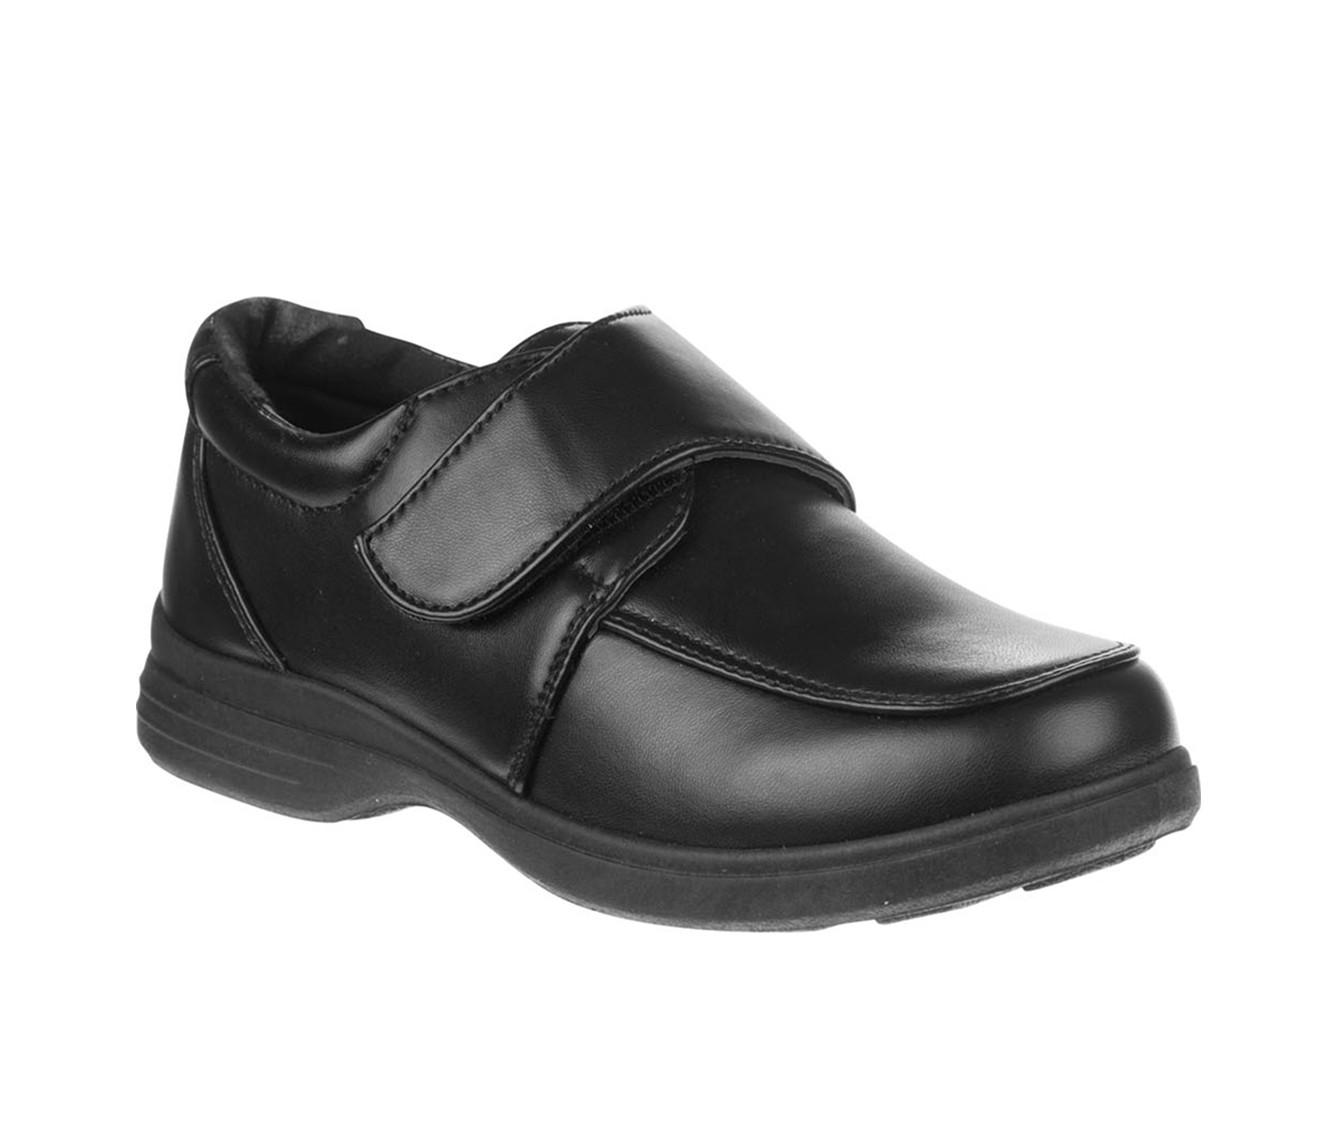 Boys' Josmo Toddler Wise Walkers Shoes